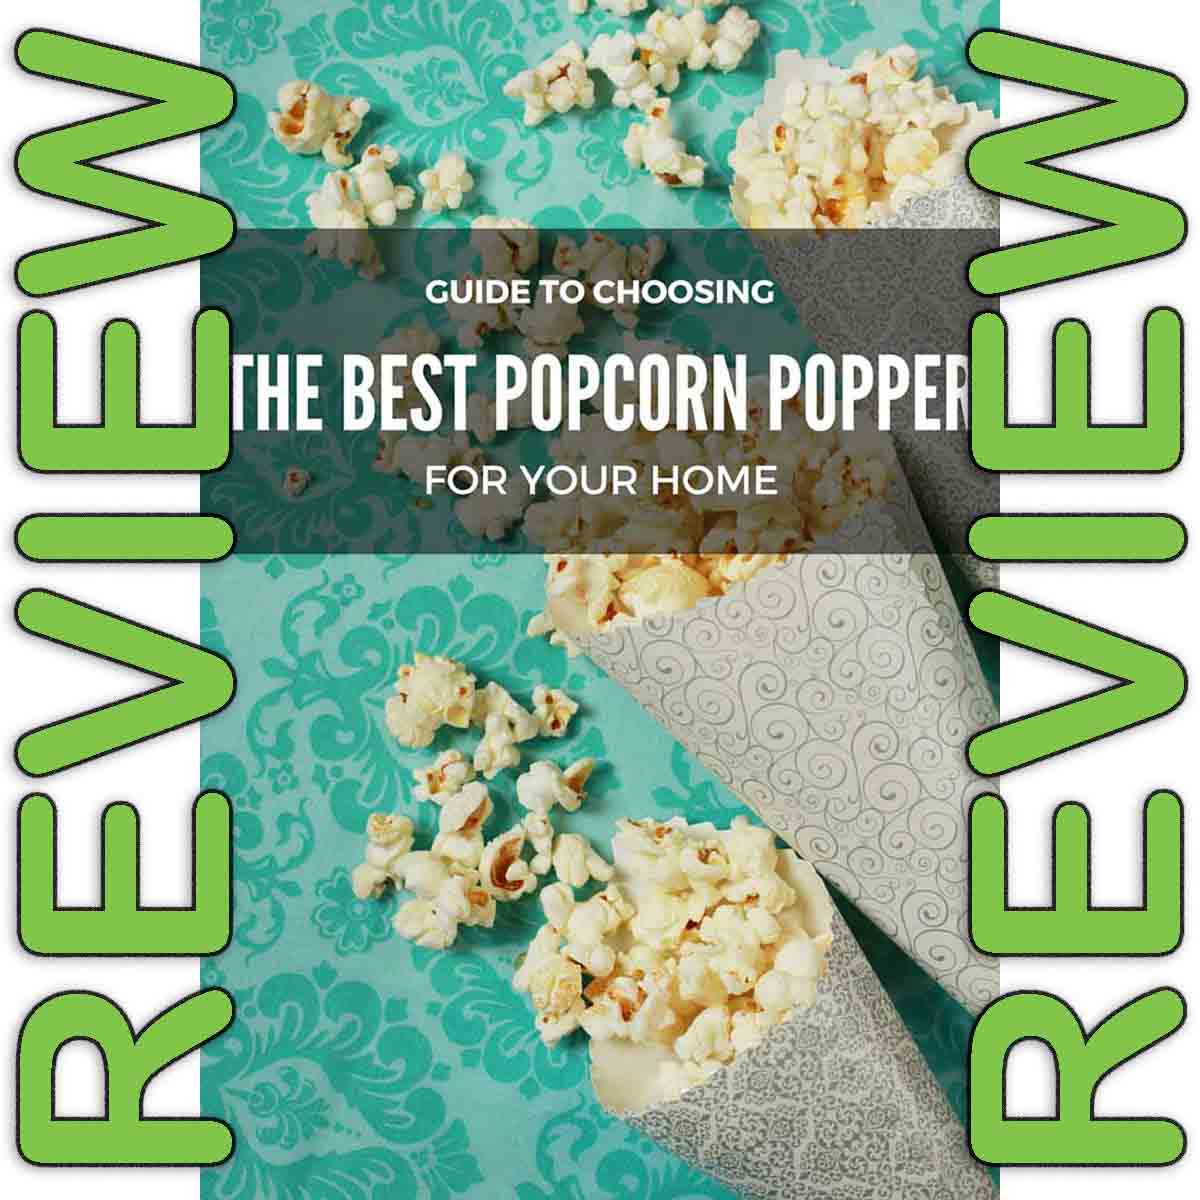 Is Aldi's Special Buy popcorn maker top of the poppers